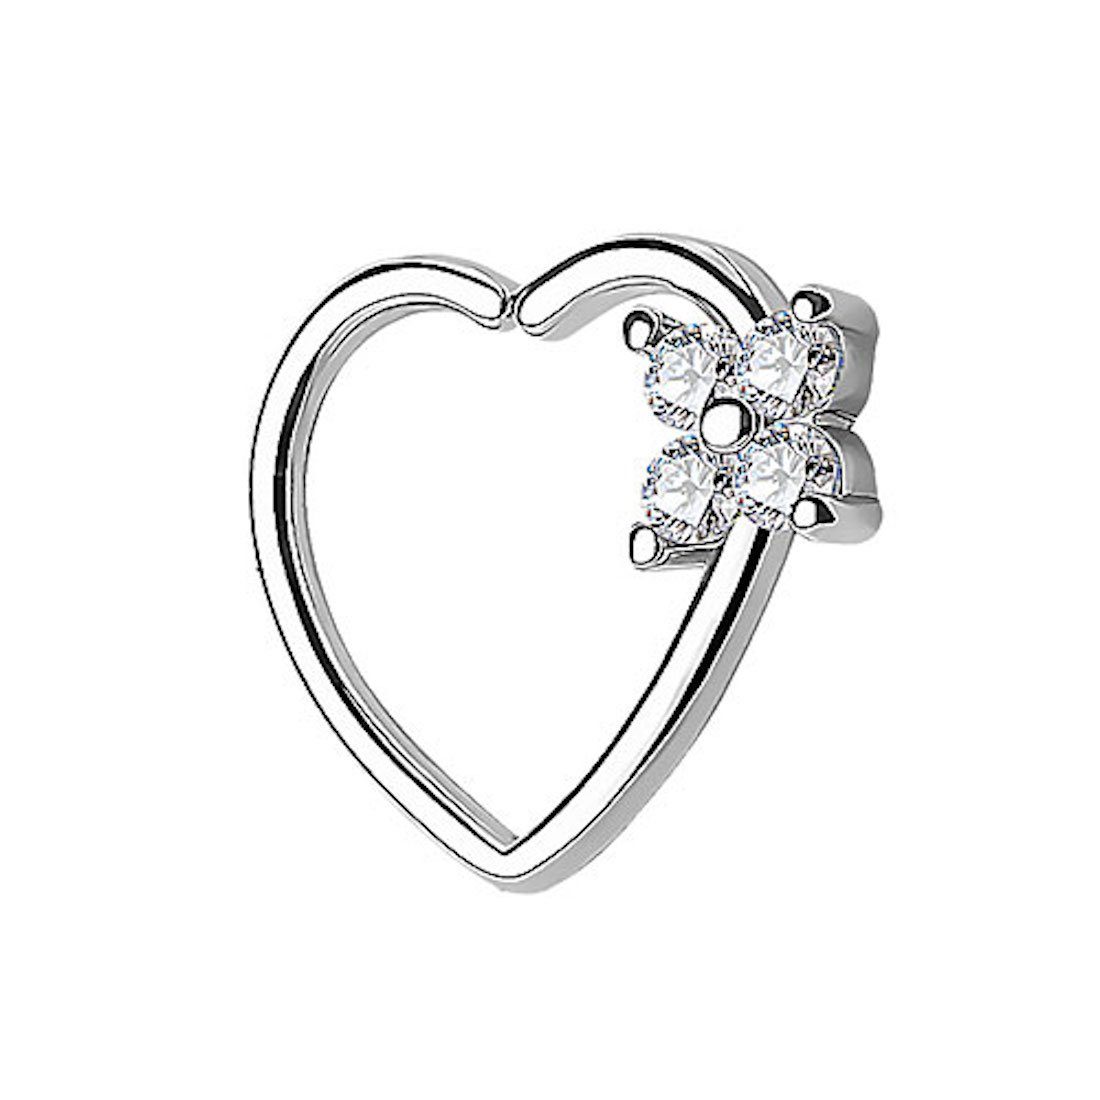 Ring Piercing - Ohrpiercing Helix Kleeblatt Taffstyle Clear Blume, Knorpel Ring Silber Kristall Continuous Piercing-Set Cartilage Tragus Strass Ohr Herz